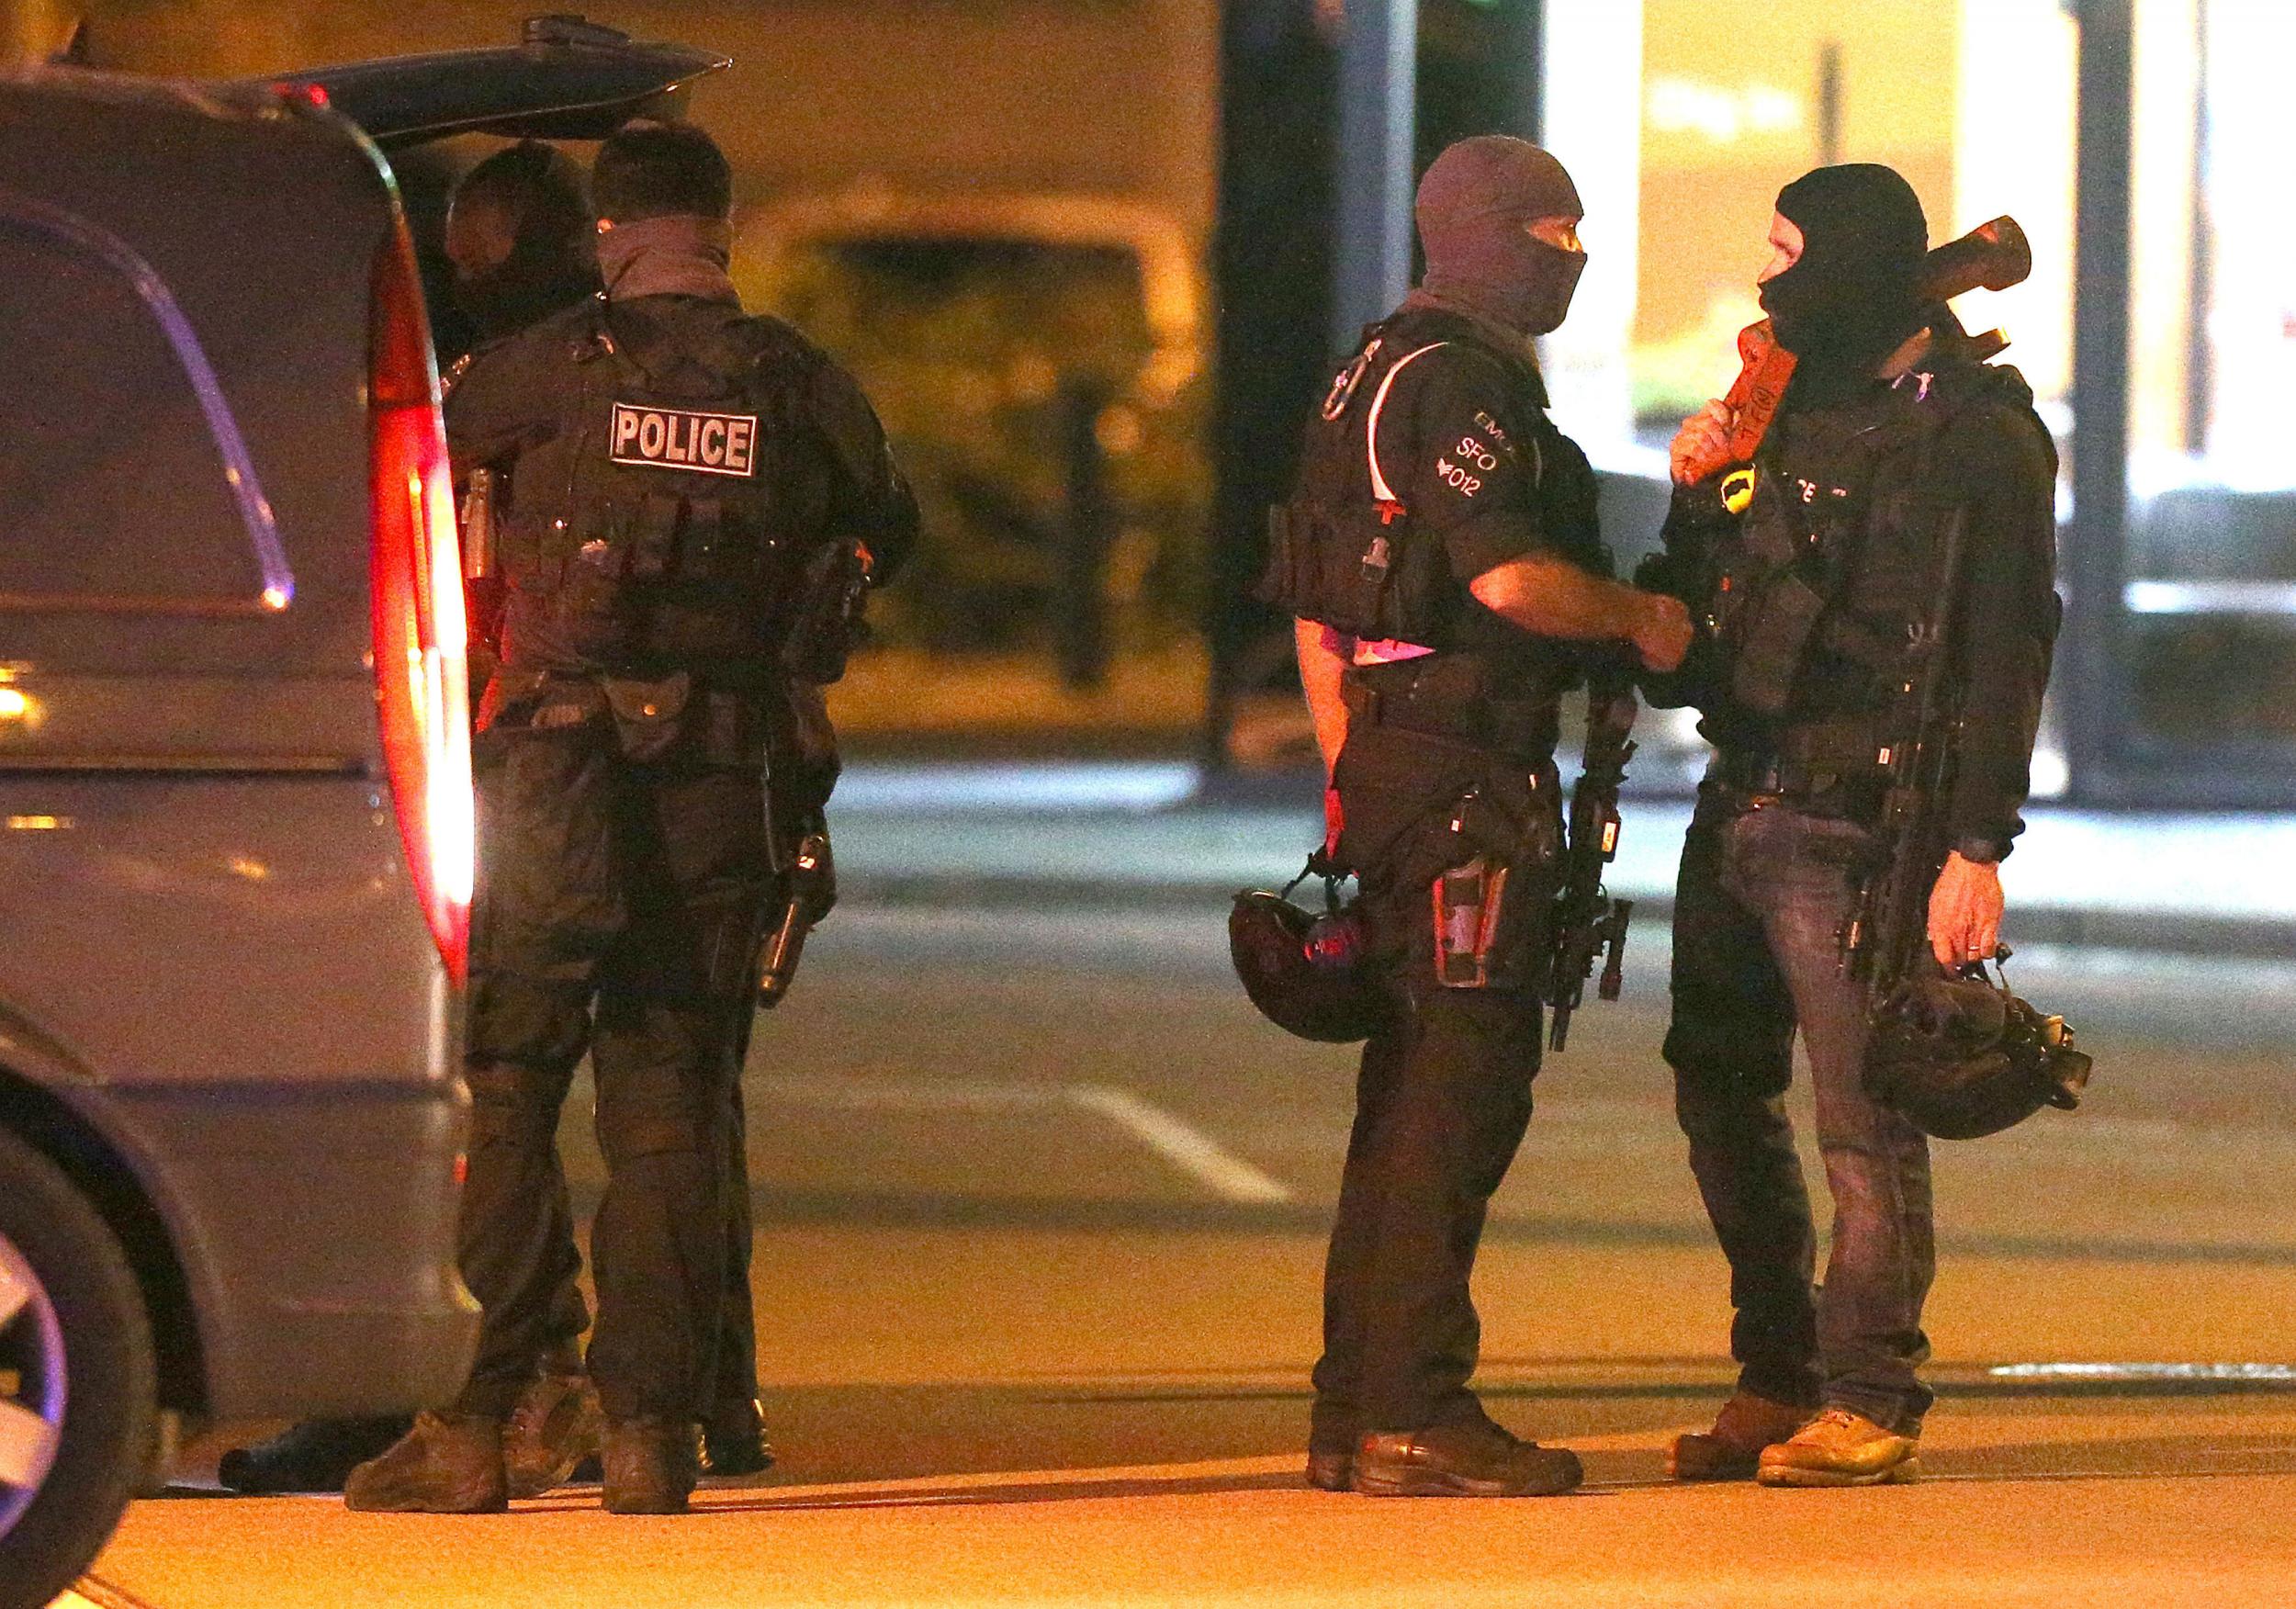 Armed police at the scene of the bowling alley where a gunman took people hostage